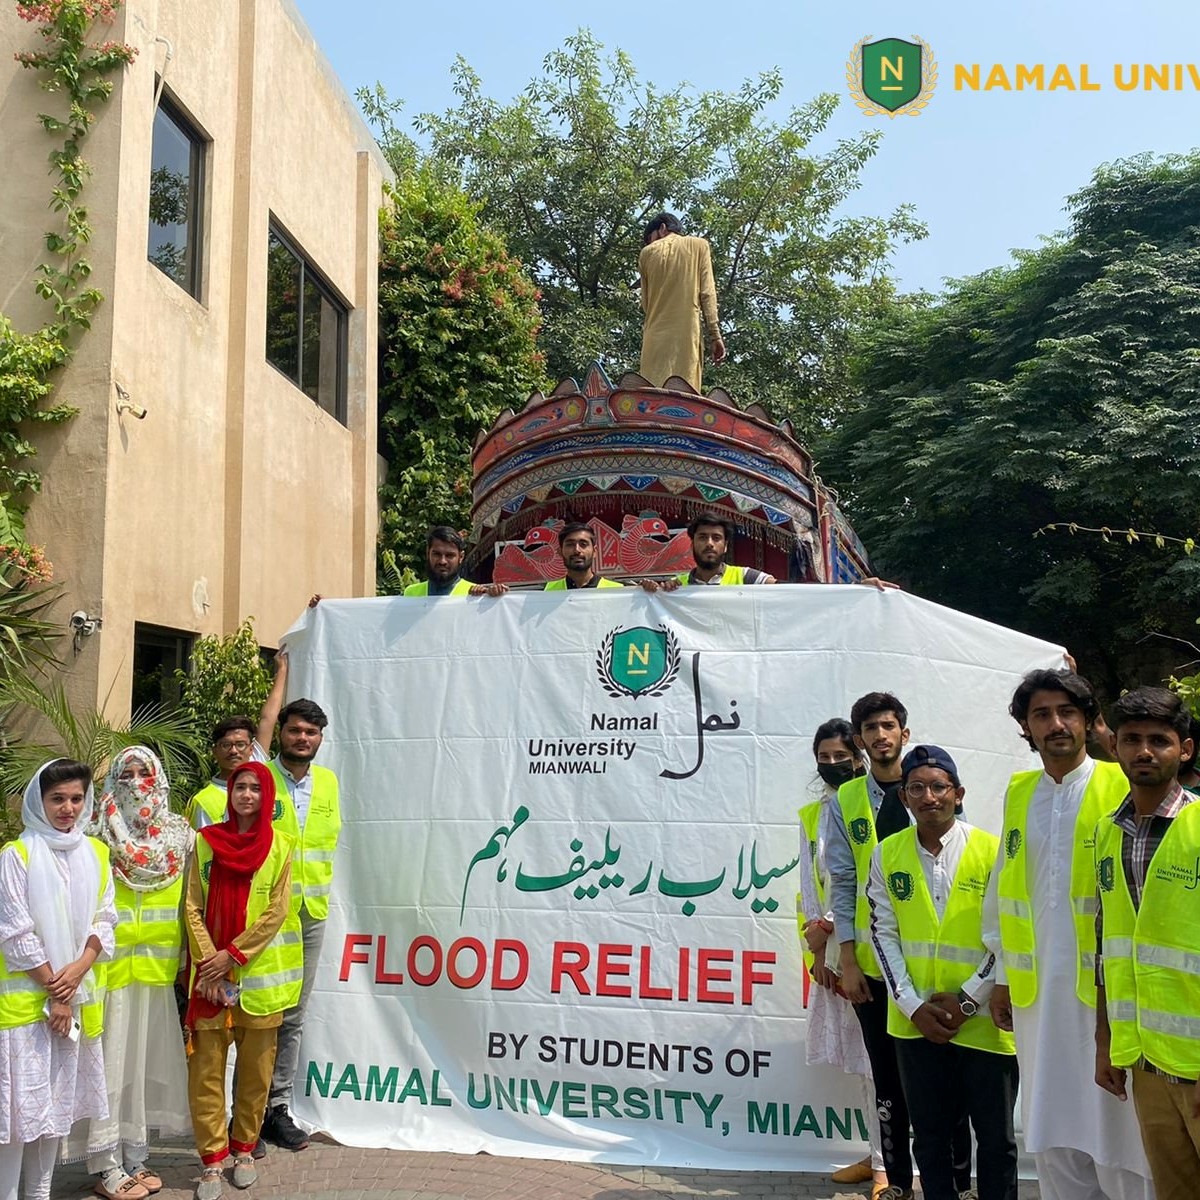 Flood Relief Drive